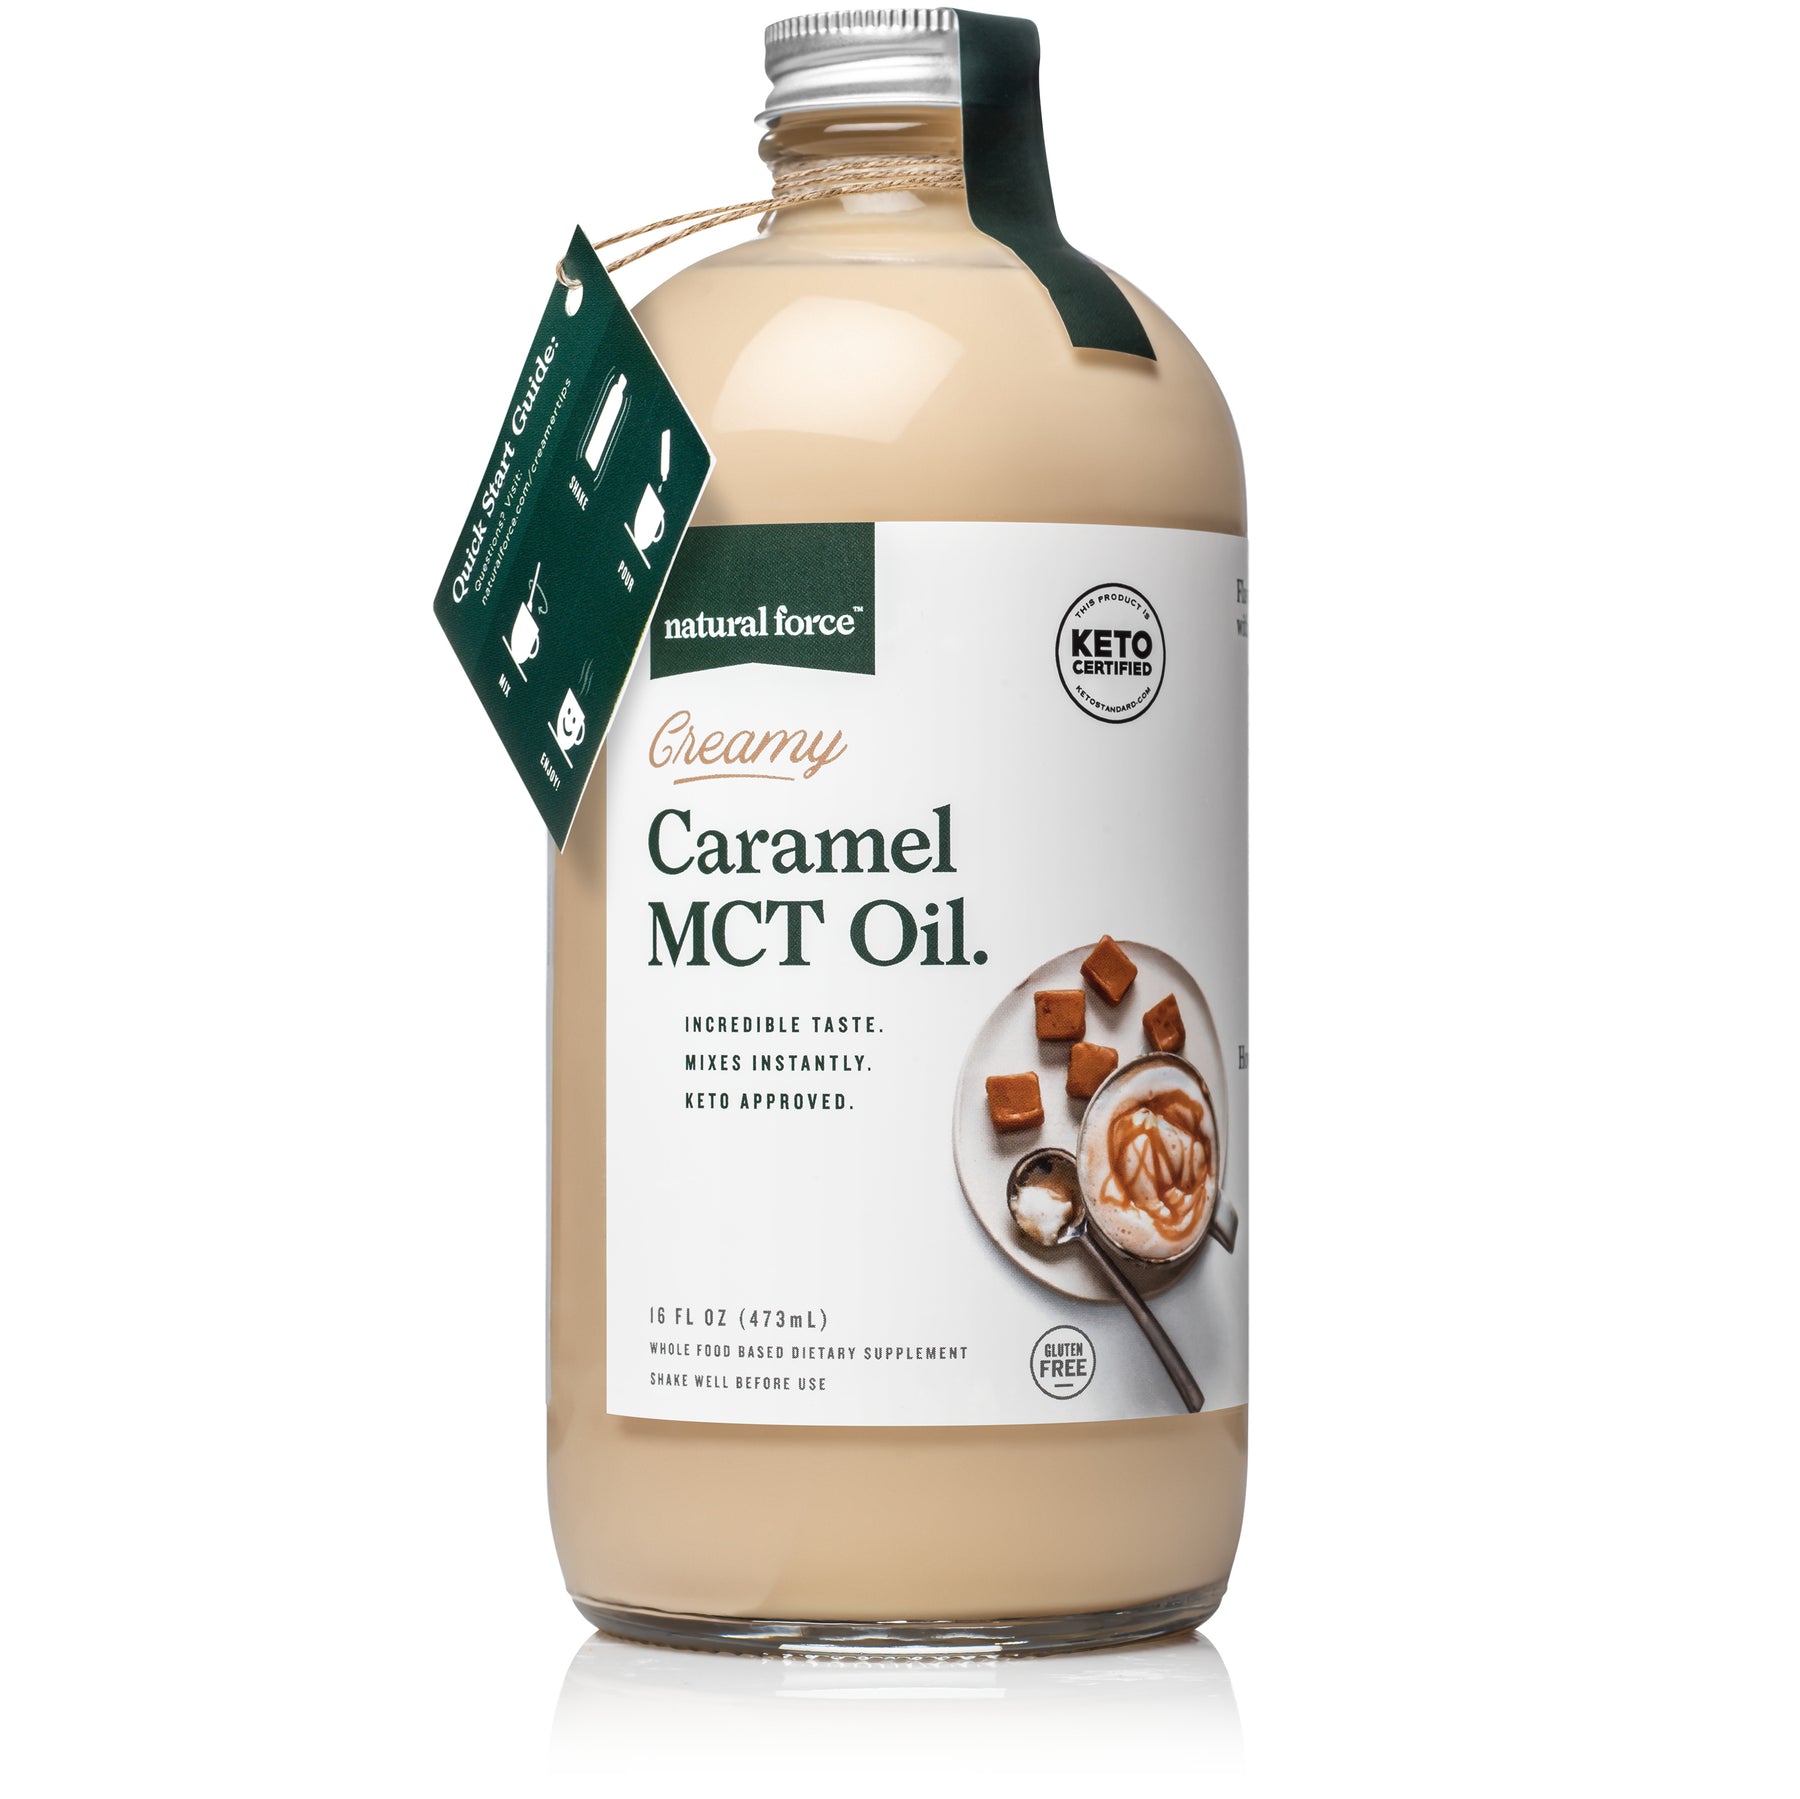 Creamy MCT Oil – Natural Force